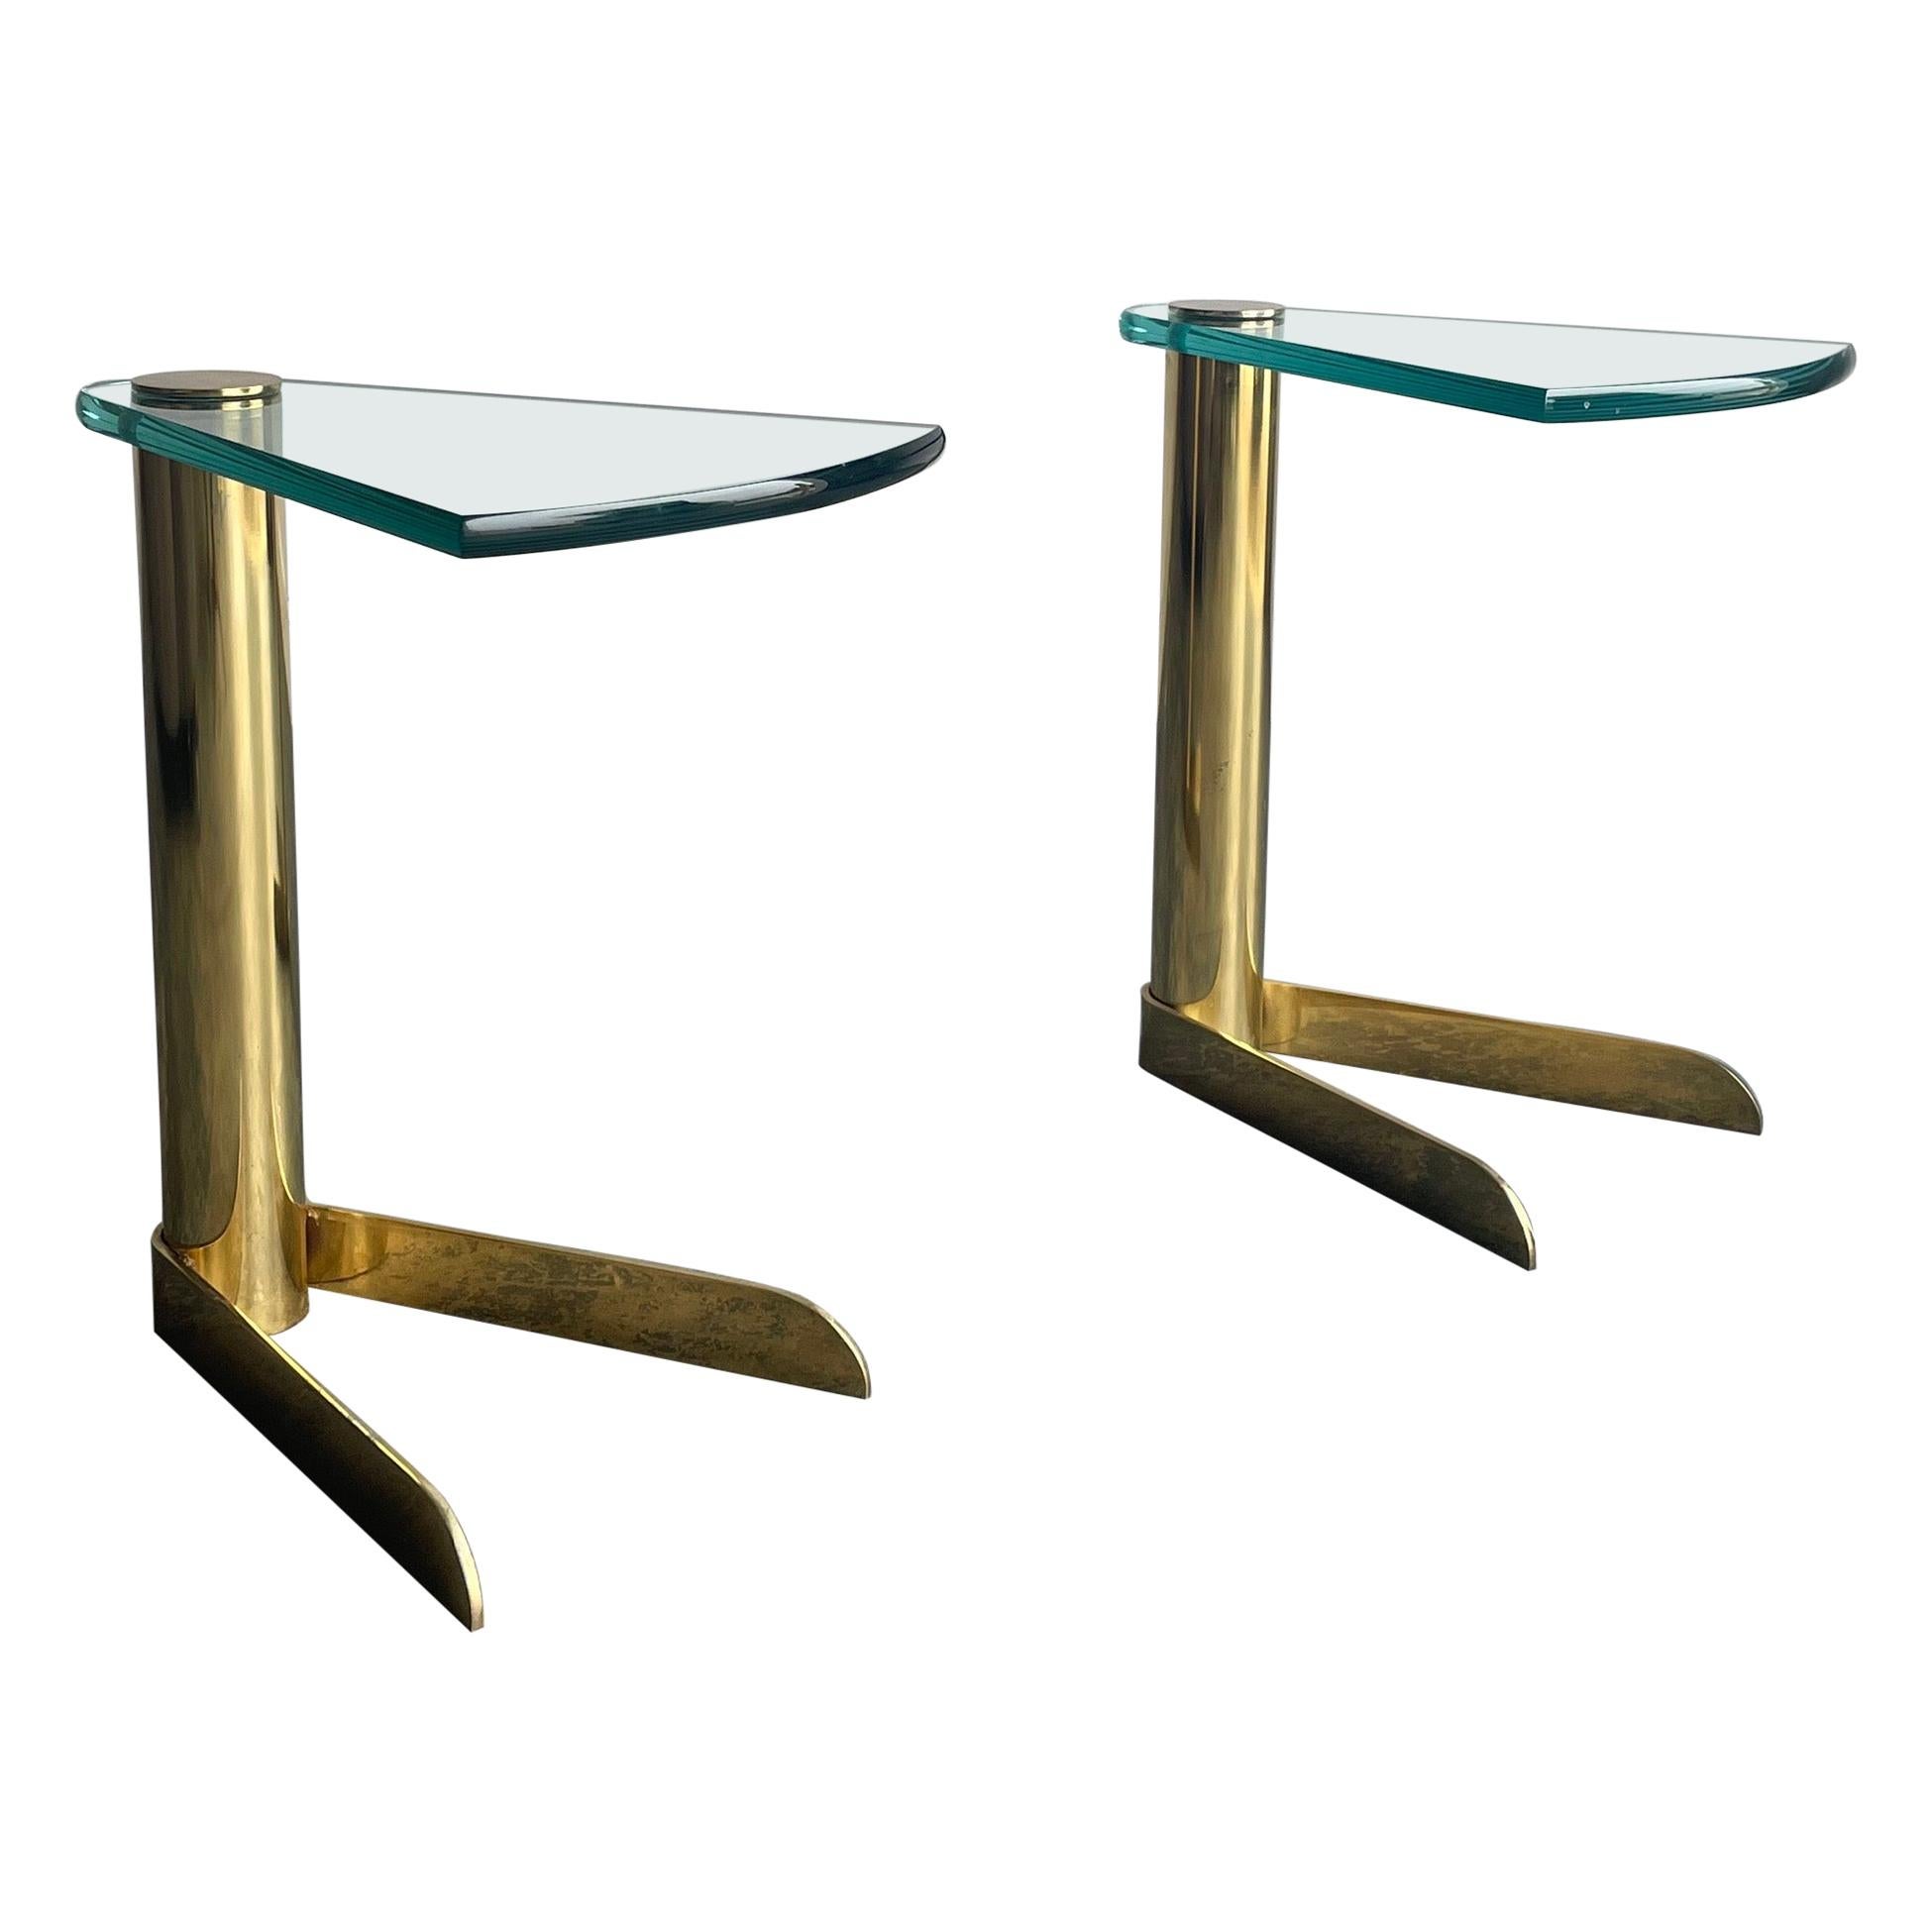 Leon Rosen for Pace Collection Brass and Glass Cantilevered “Wedge” Drink Tables